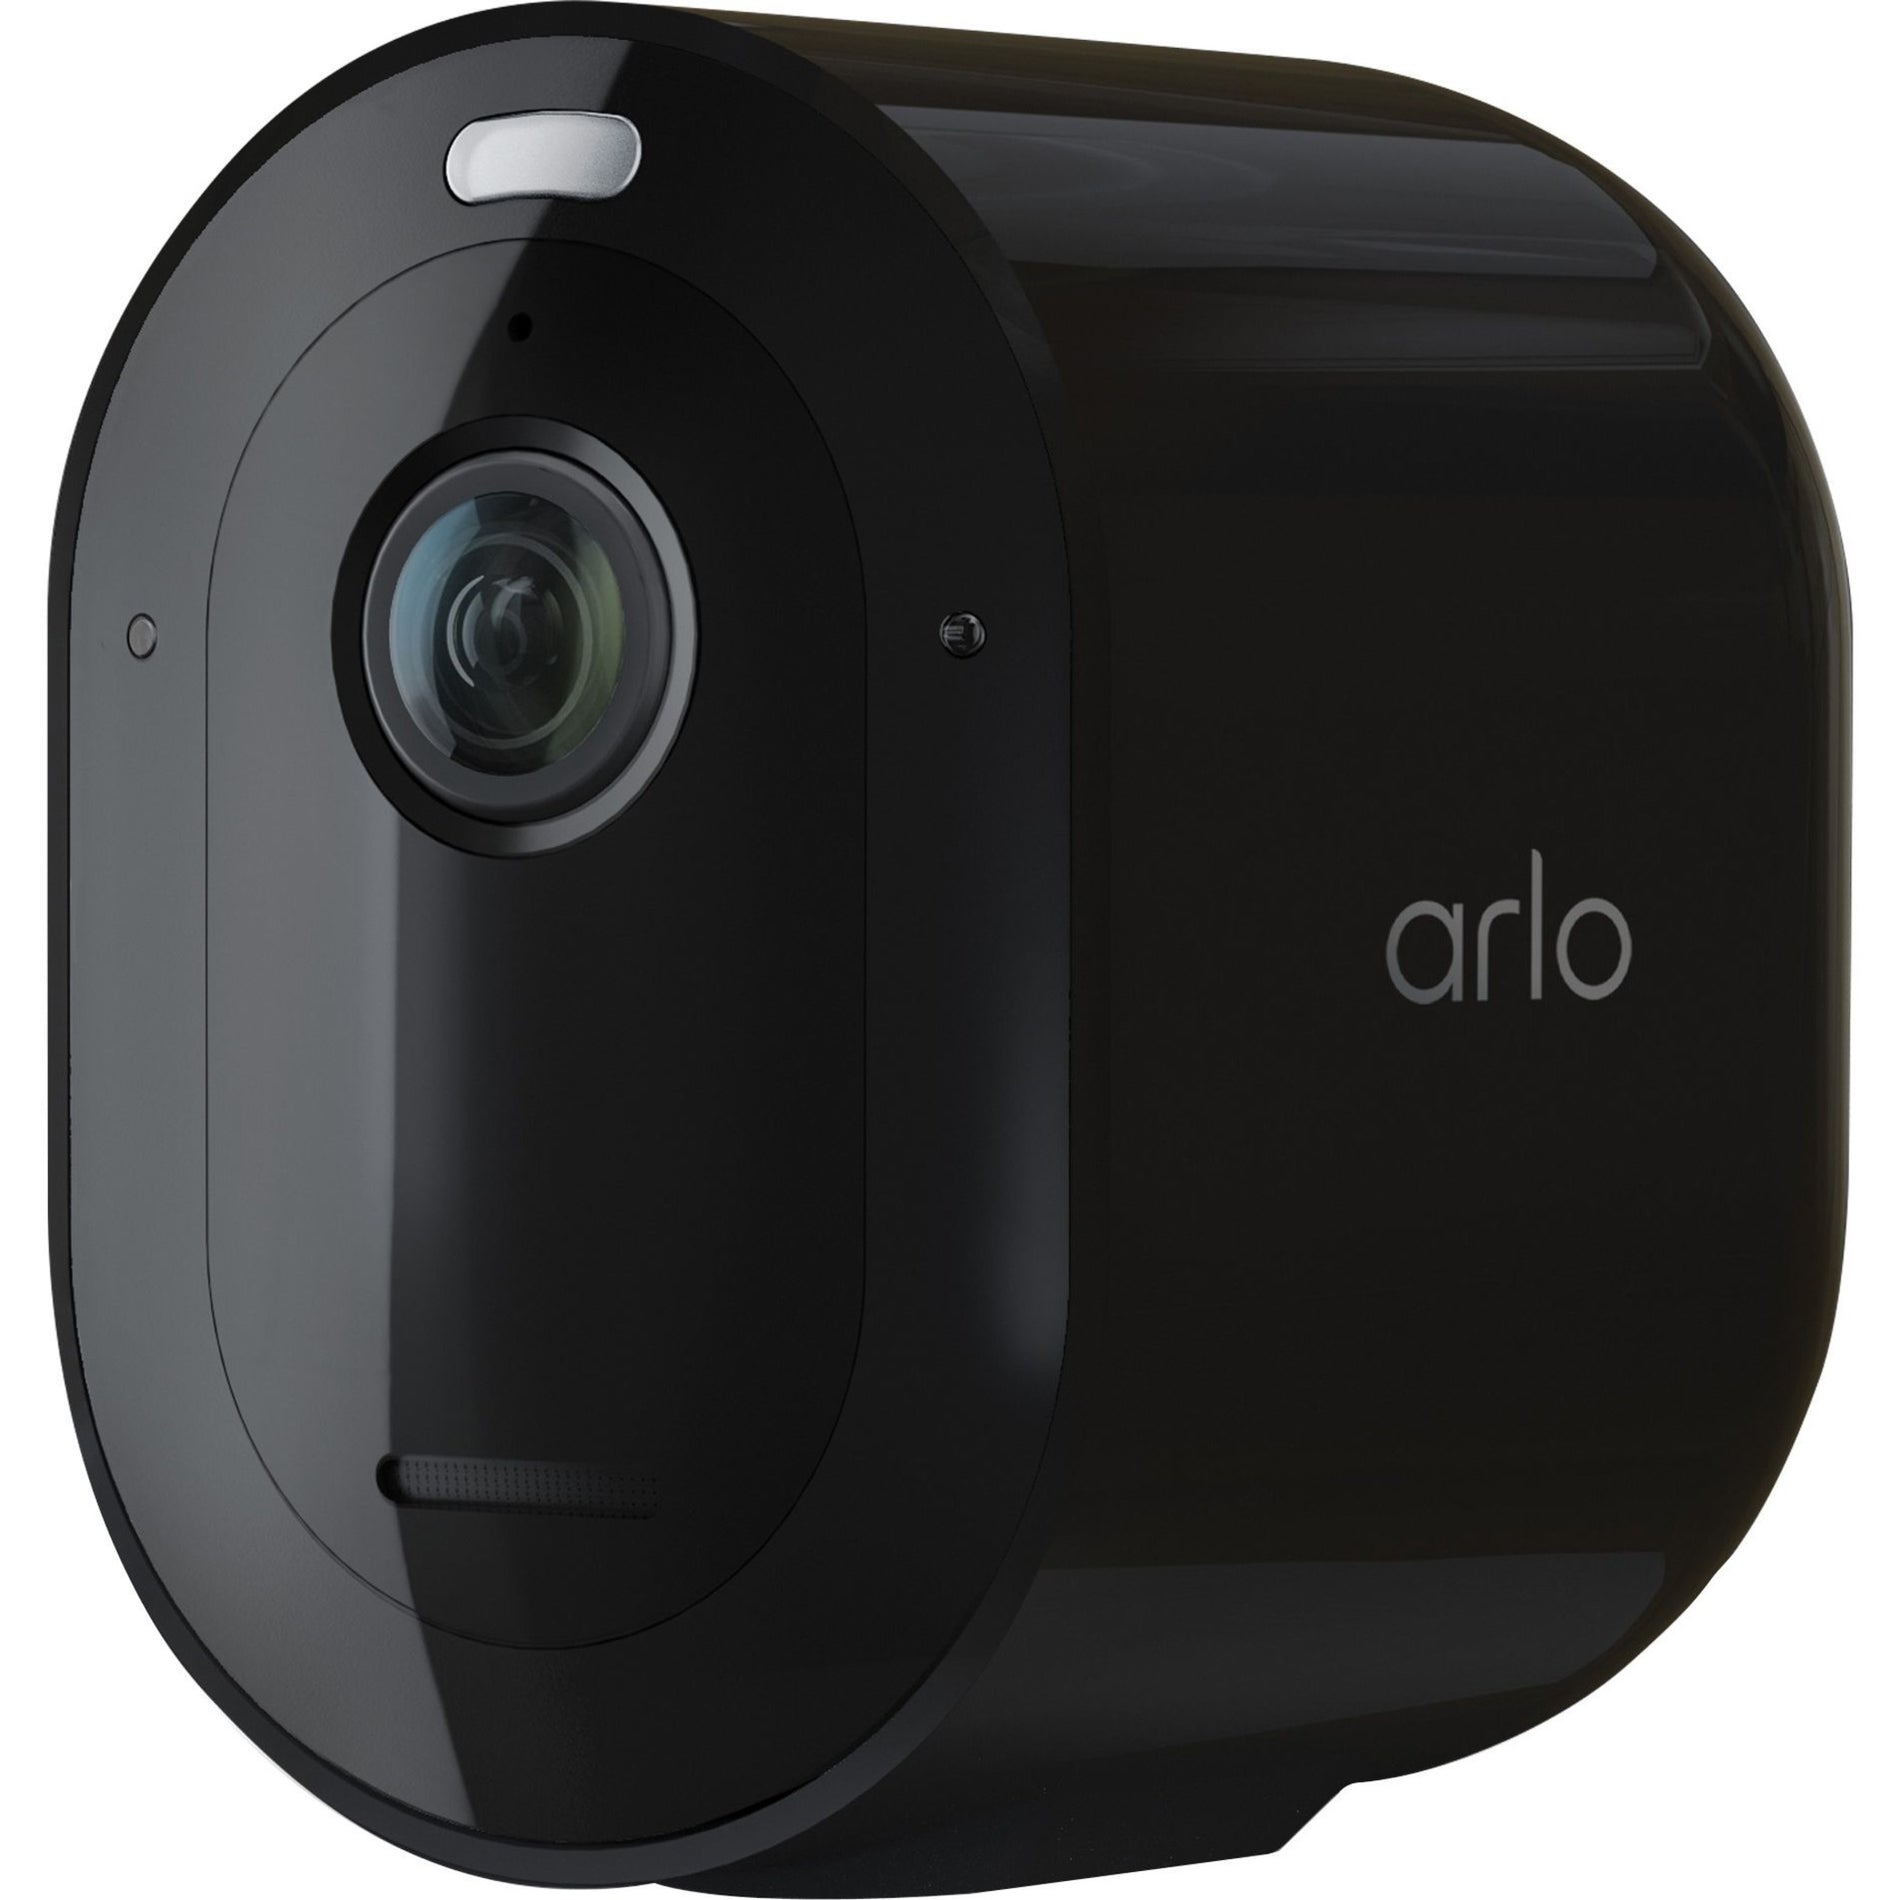 Arlo VMC4050B-100NAS Pro 4 Wire-Free Spotlight Camera, 2K Video with HDR, Color Night Vision, 160 View, 2-Way Audio, Siren